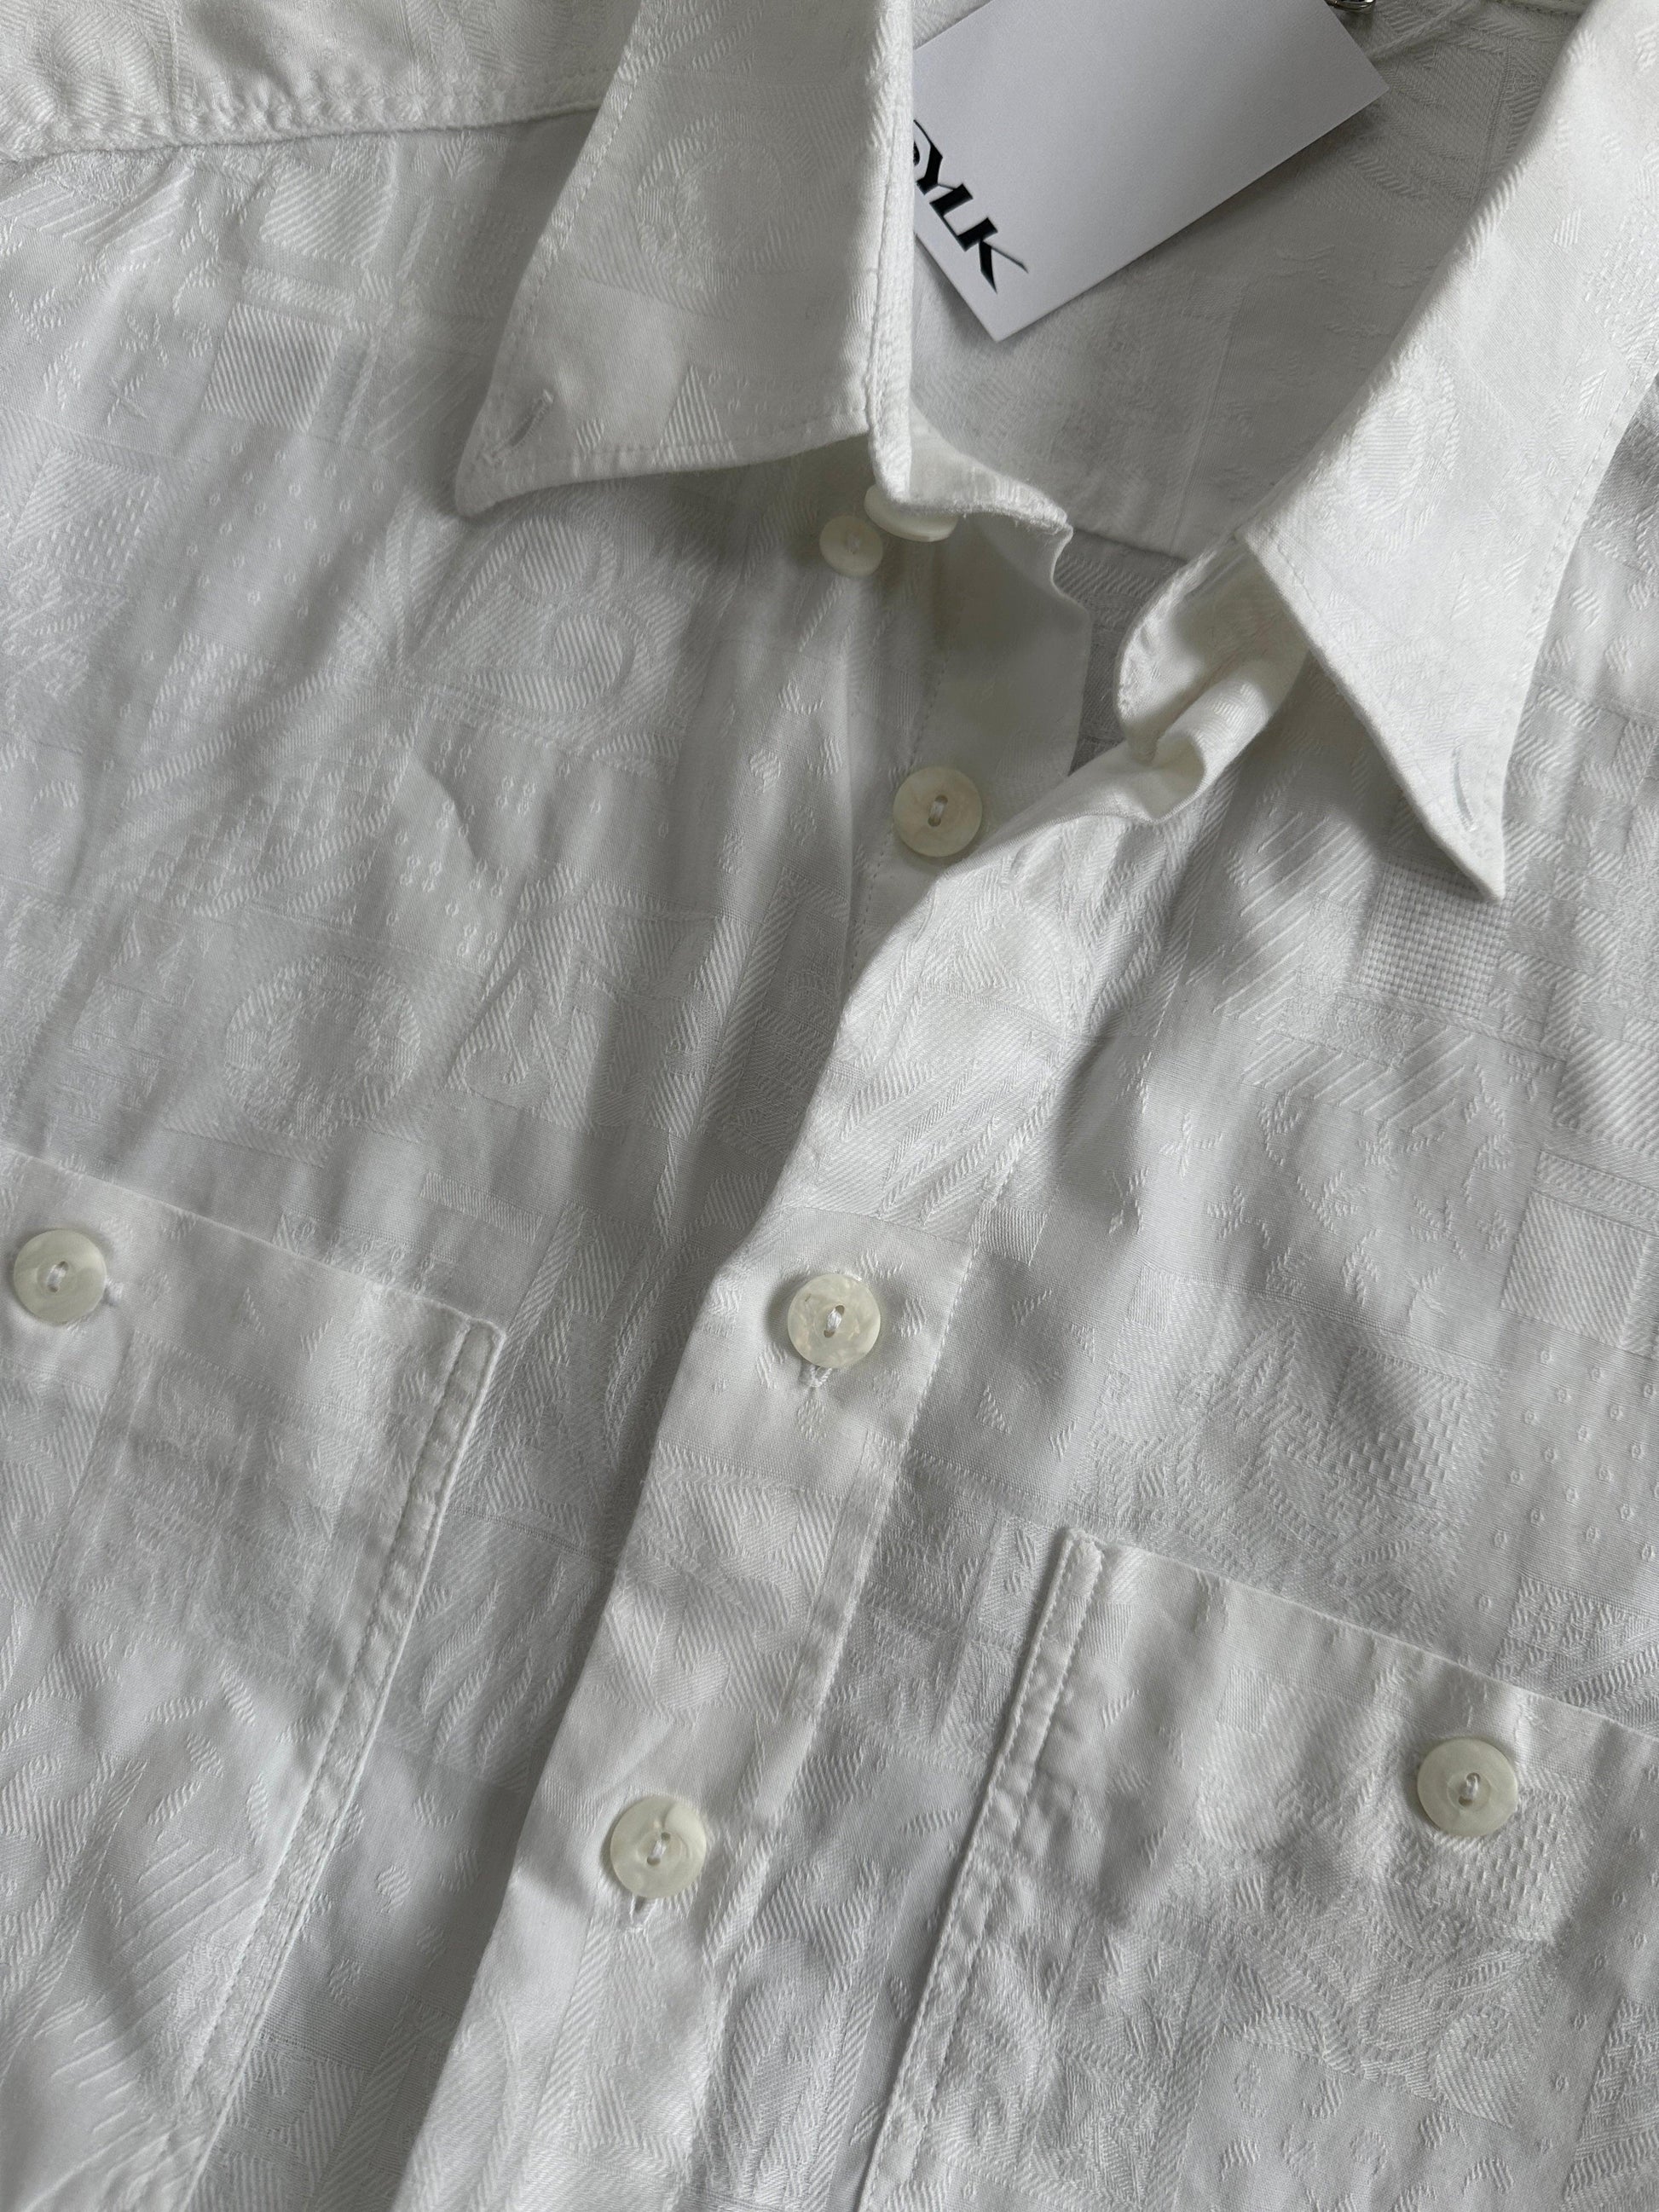 Vintage Embroidery Cotton Shirt - XL - Known Source